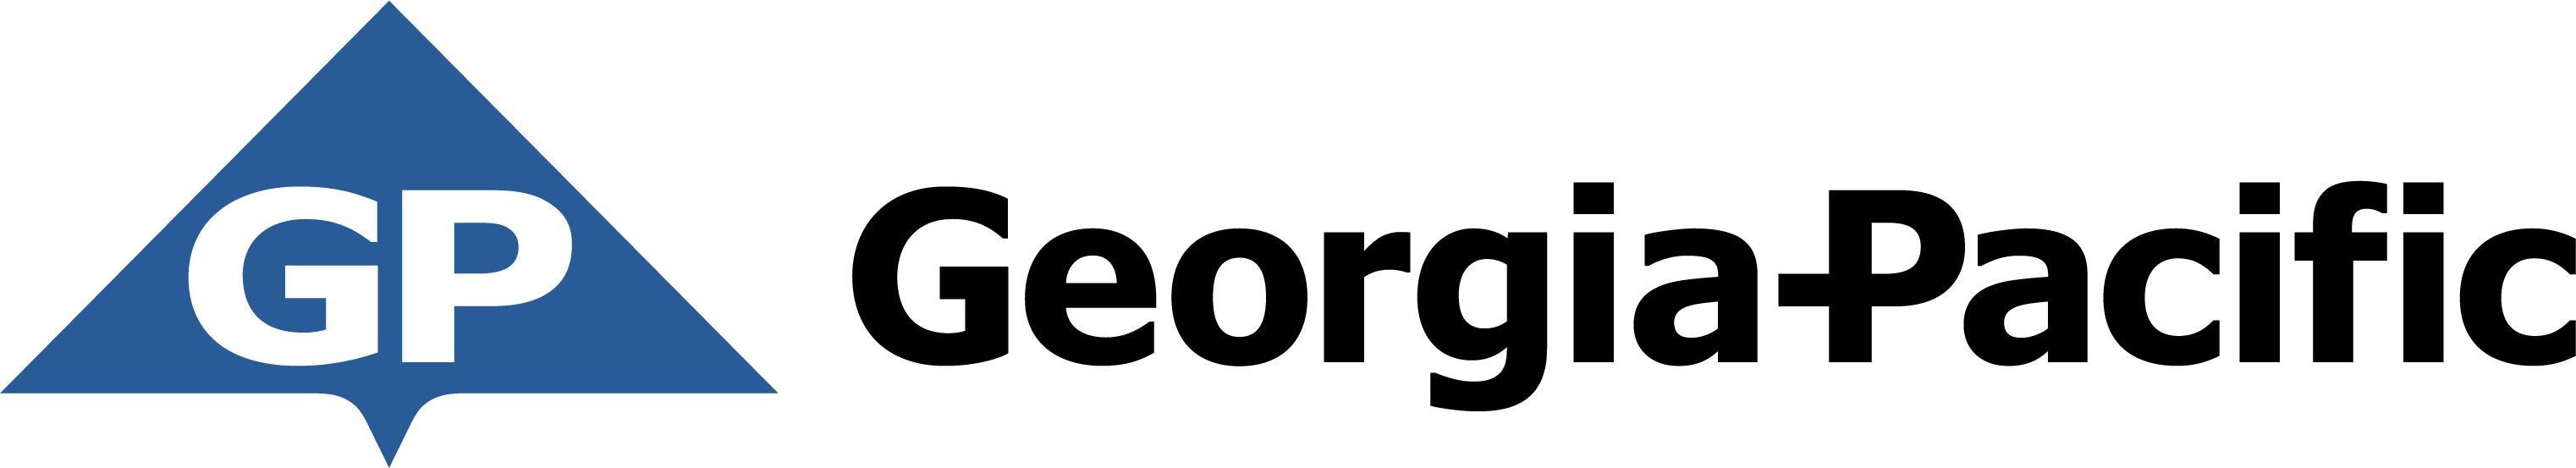 Georgia Red and Blue Business Logo - Welcome To Georgia Pacific